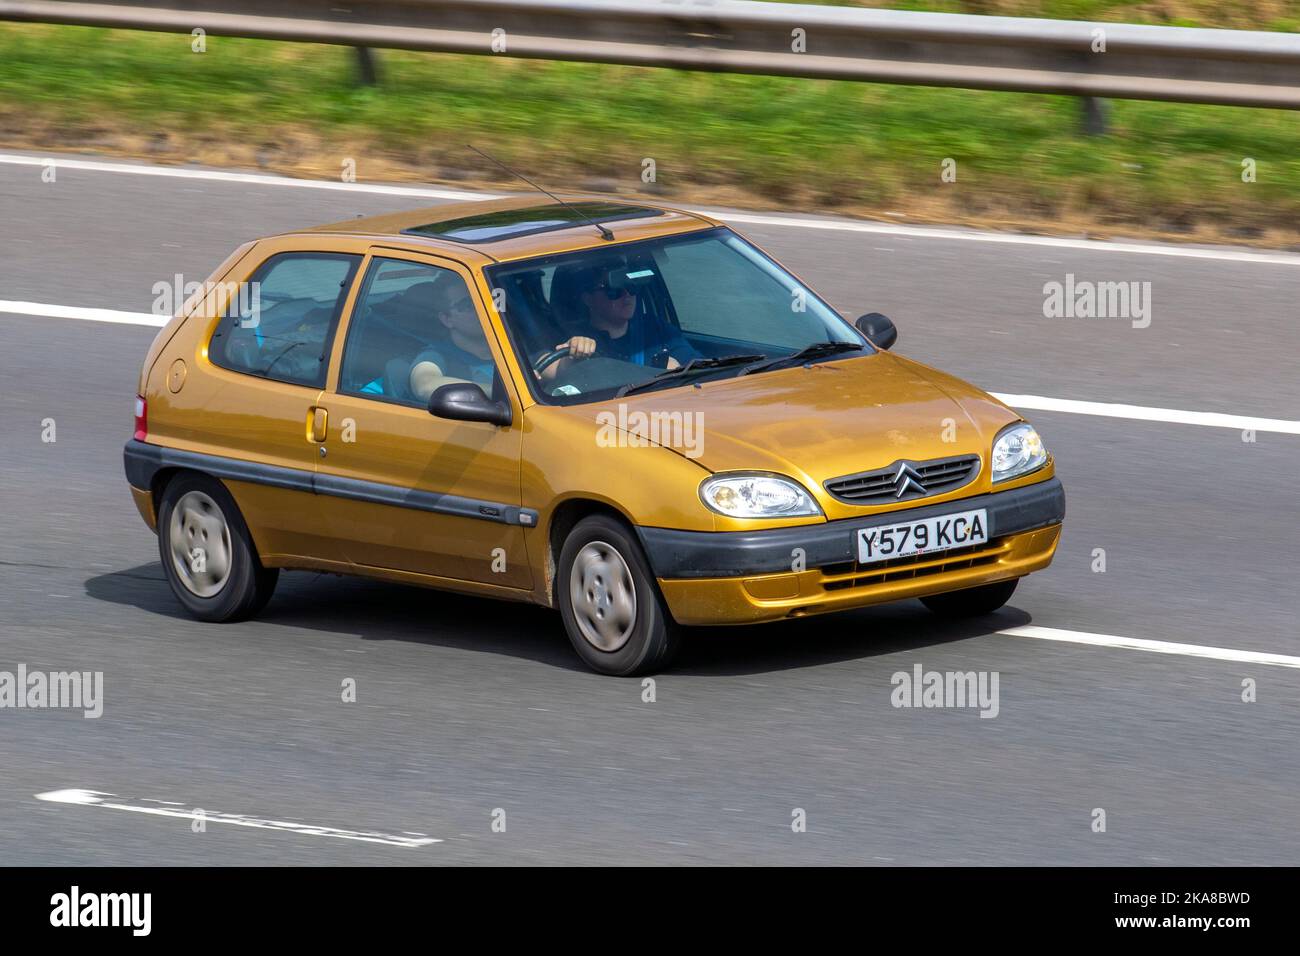 2001 Gold yellow CITROEN SAXO FIRST 1124cc Petrol 5 speed manual, sold in  Japan as the Citroën Chanson, travelling on the M6 motorway, UK Stock Photo  - Alamy